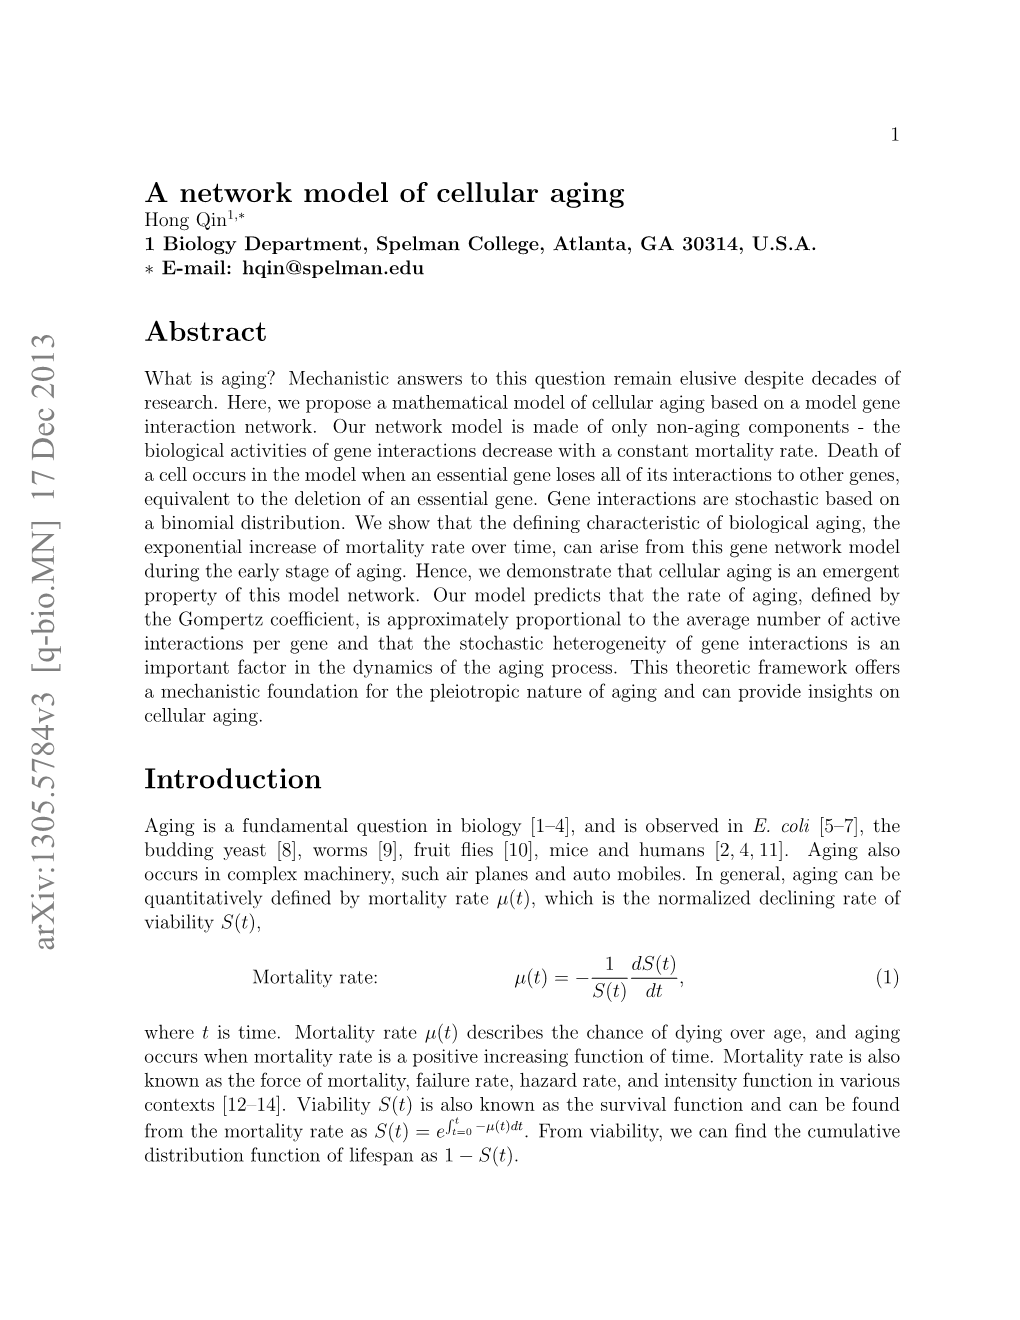 A Network Model for Cellular Aging